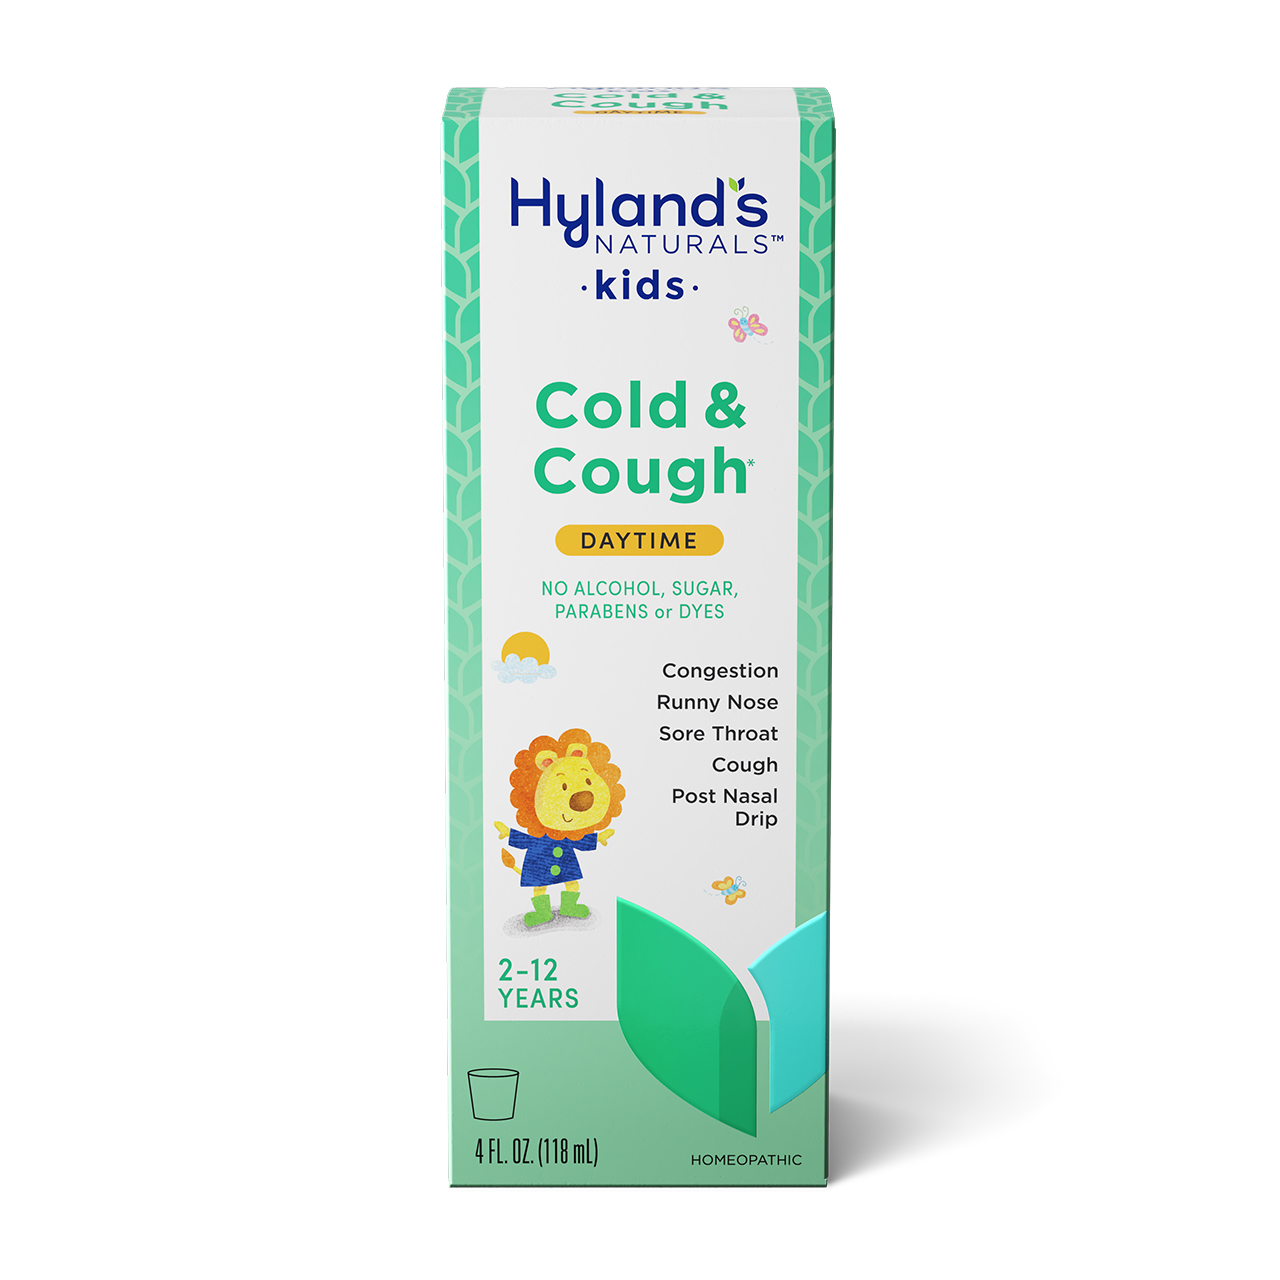 Hyland's Kids Cold & Cough Relief Liquid, Natural Relief of Common Cold Symptoms, 4 Ounces - image 1 of 2